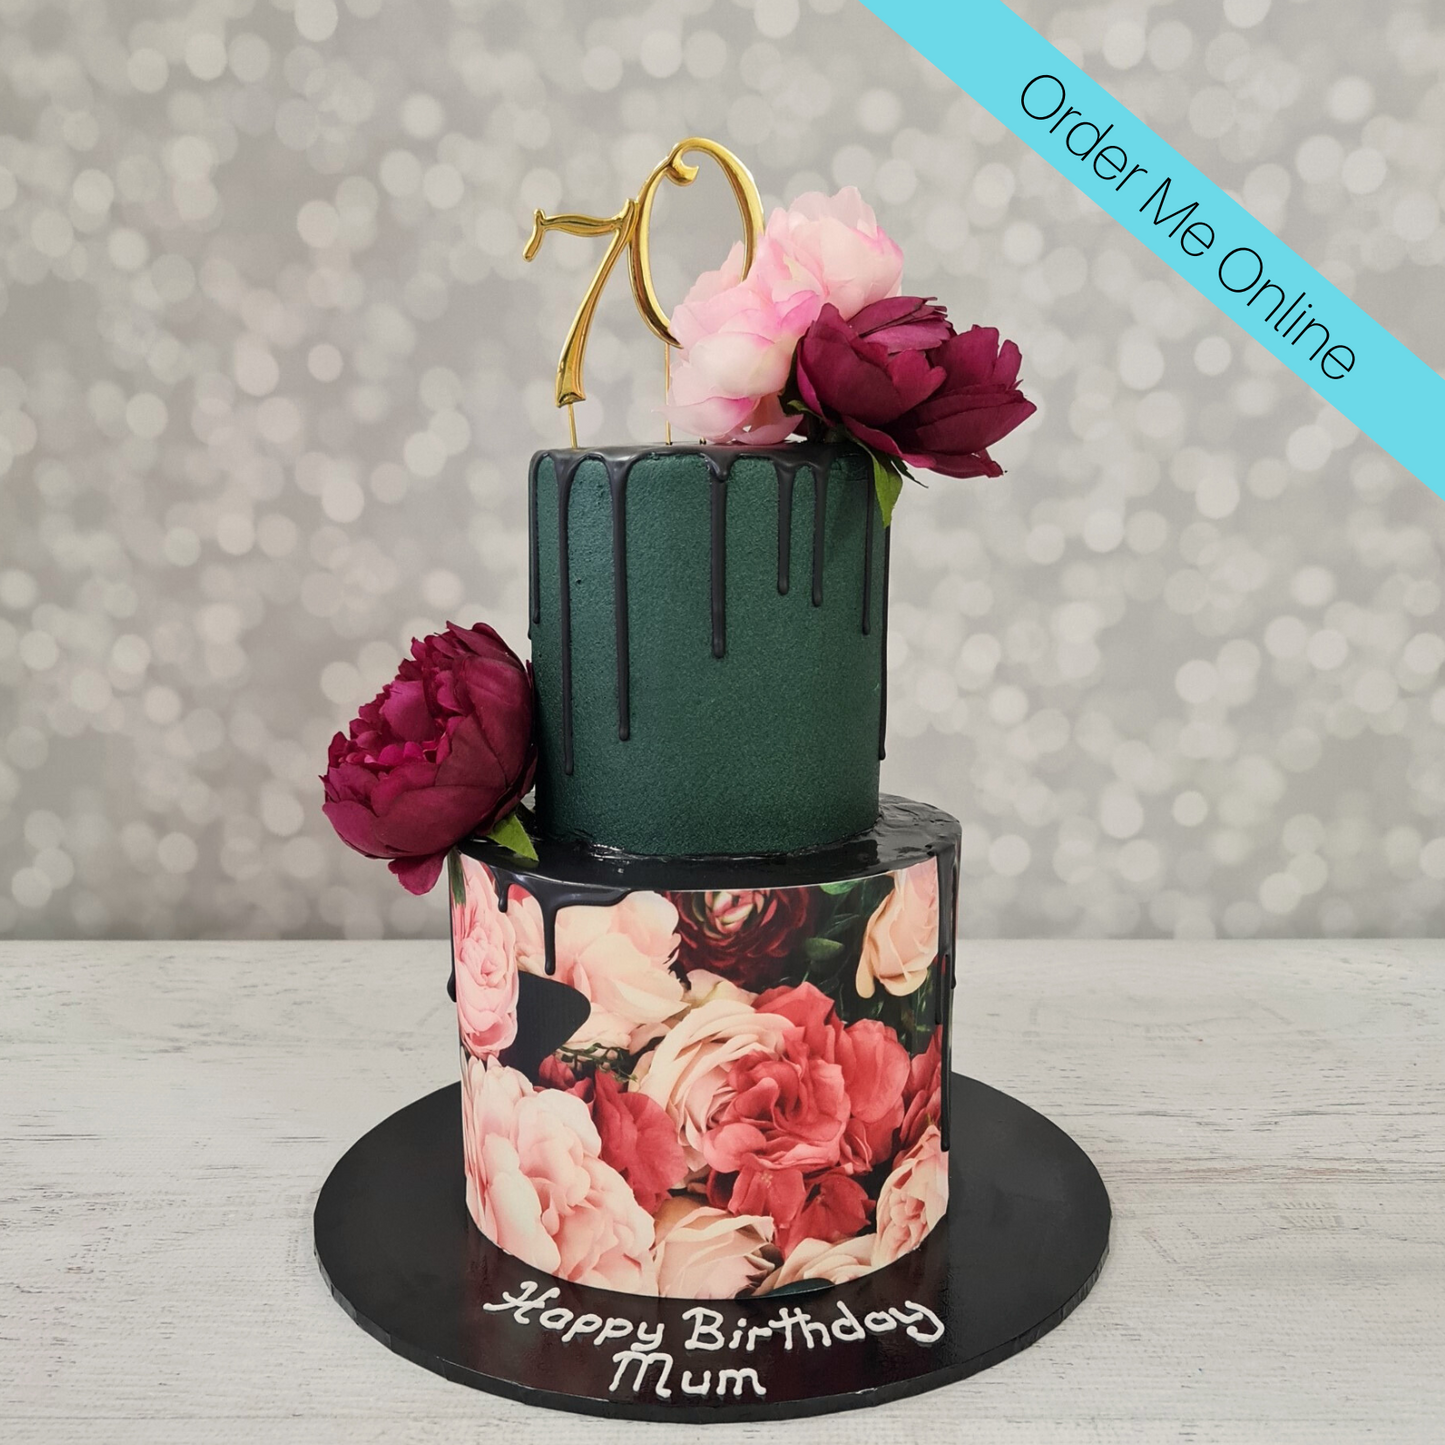 Birthday Cake Delivery in Bangalore, Order Birthday Cakes in Bangalore |  FlowerAura